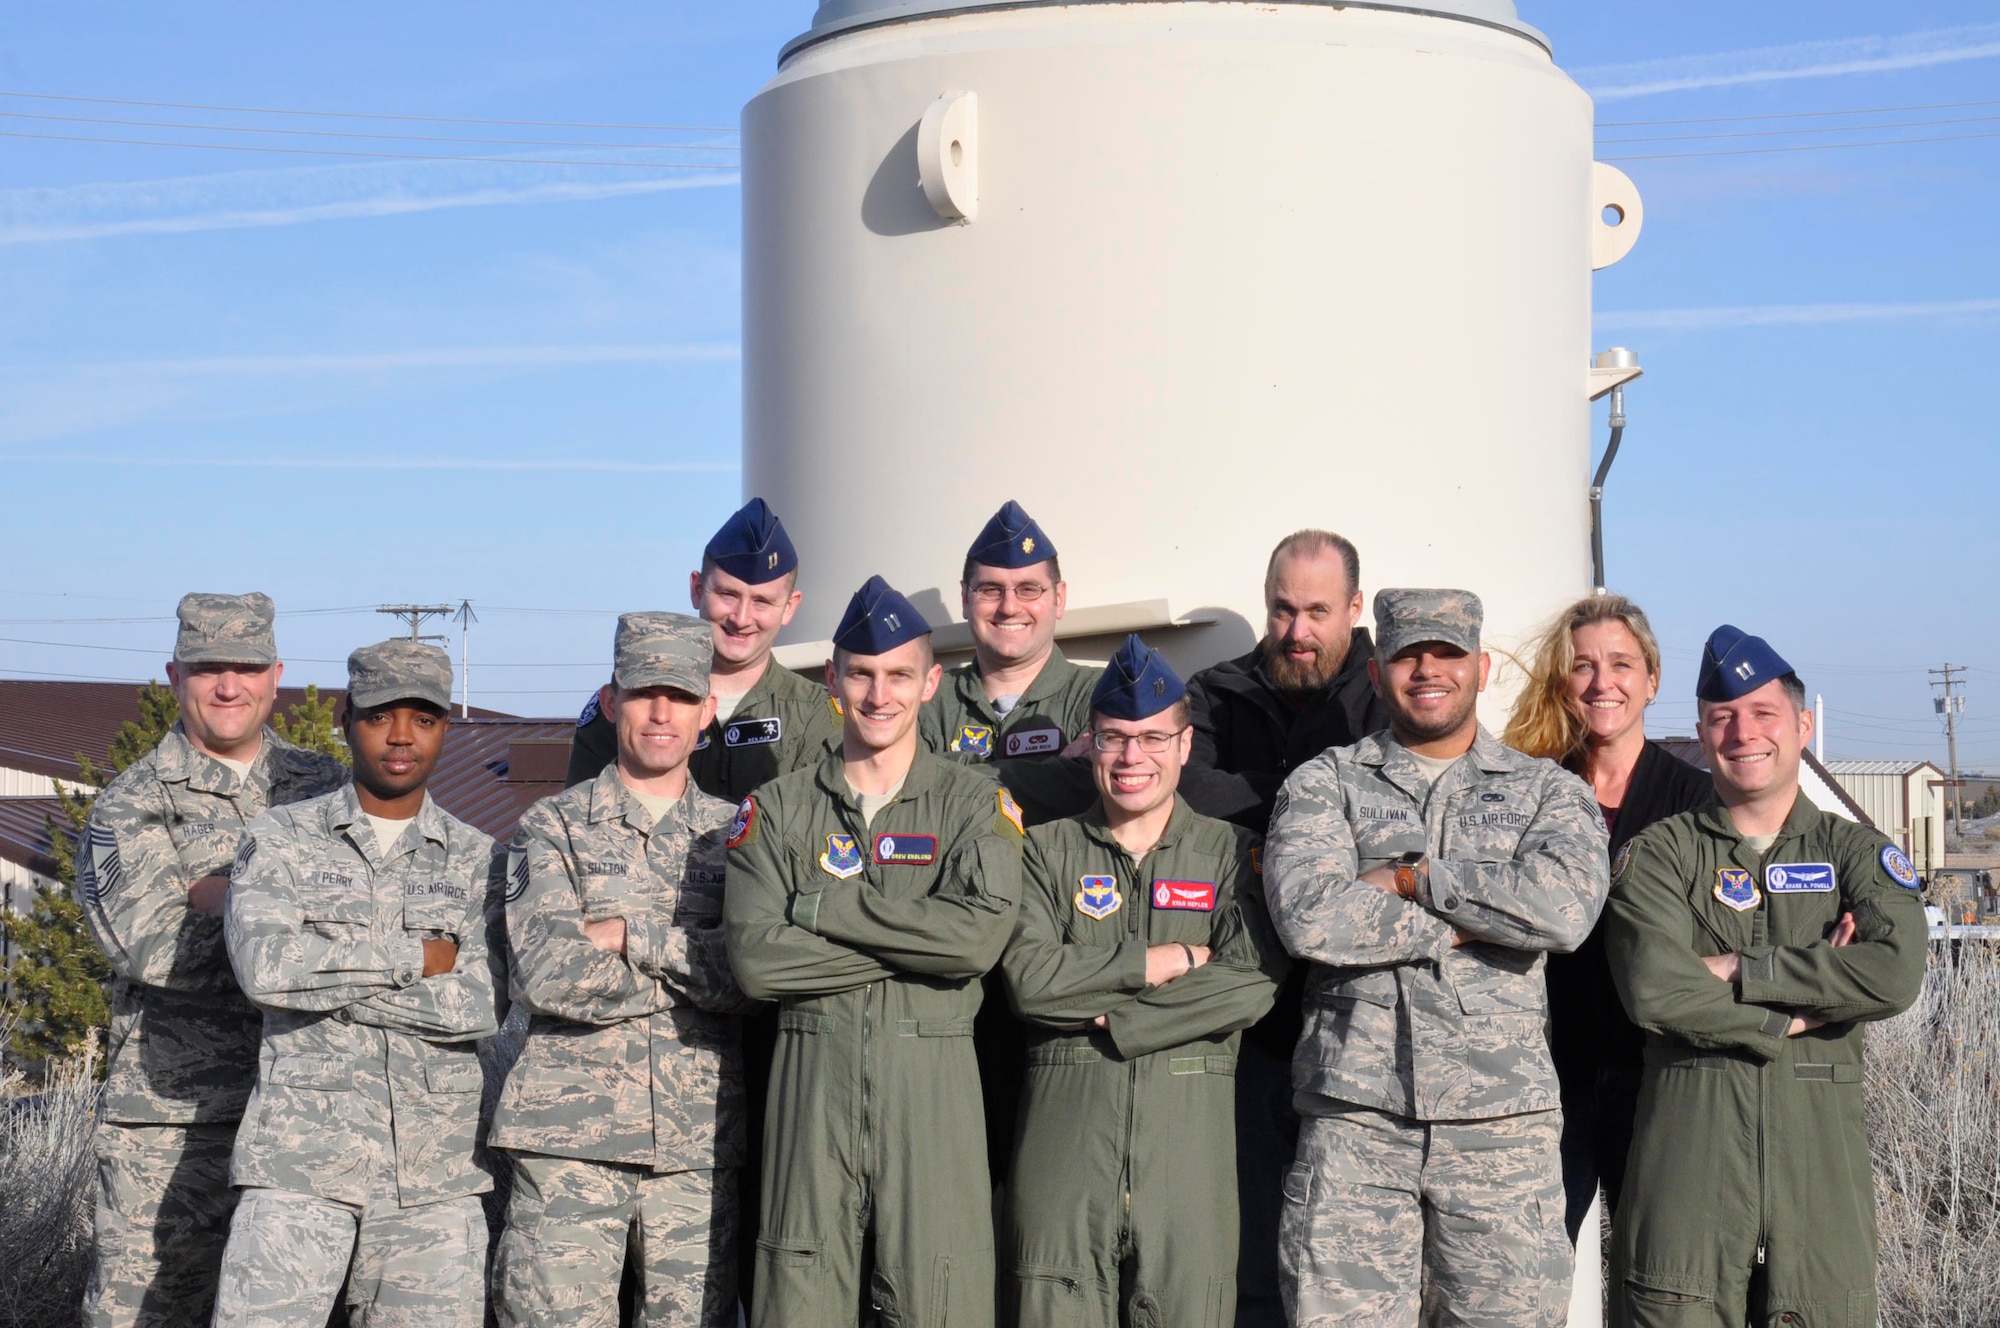 The 20th Air Force Olympic Sword team pose for a group photo at Hill Air Force Base, Utah., Feb. 17, 2017. The team of missile combat operators, missile maintainers and Technical Order Management Agency office members spent three weeks improving the two main technical orders used by missileers who operate the Minuteman III weapon system. (U.S. Air Force photo by 1st Lt. Veronica Perez)